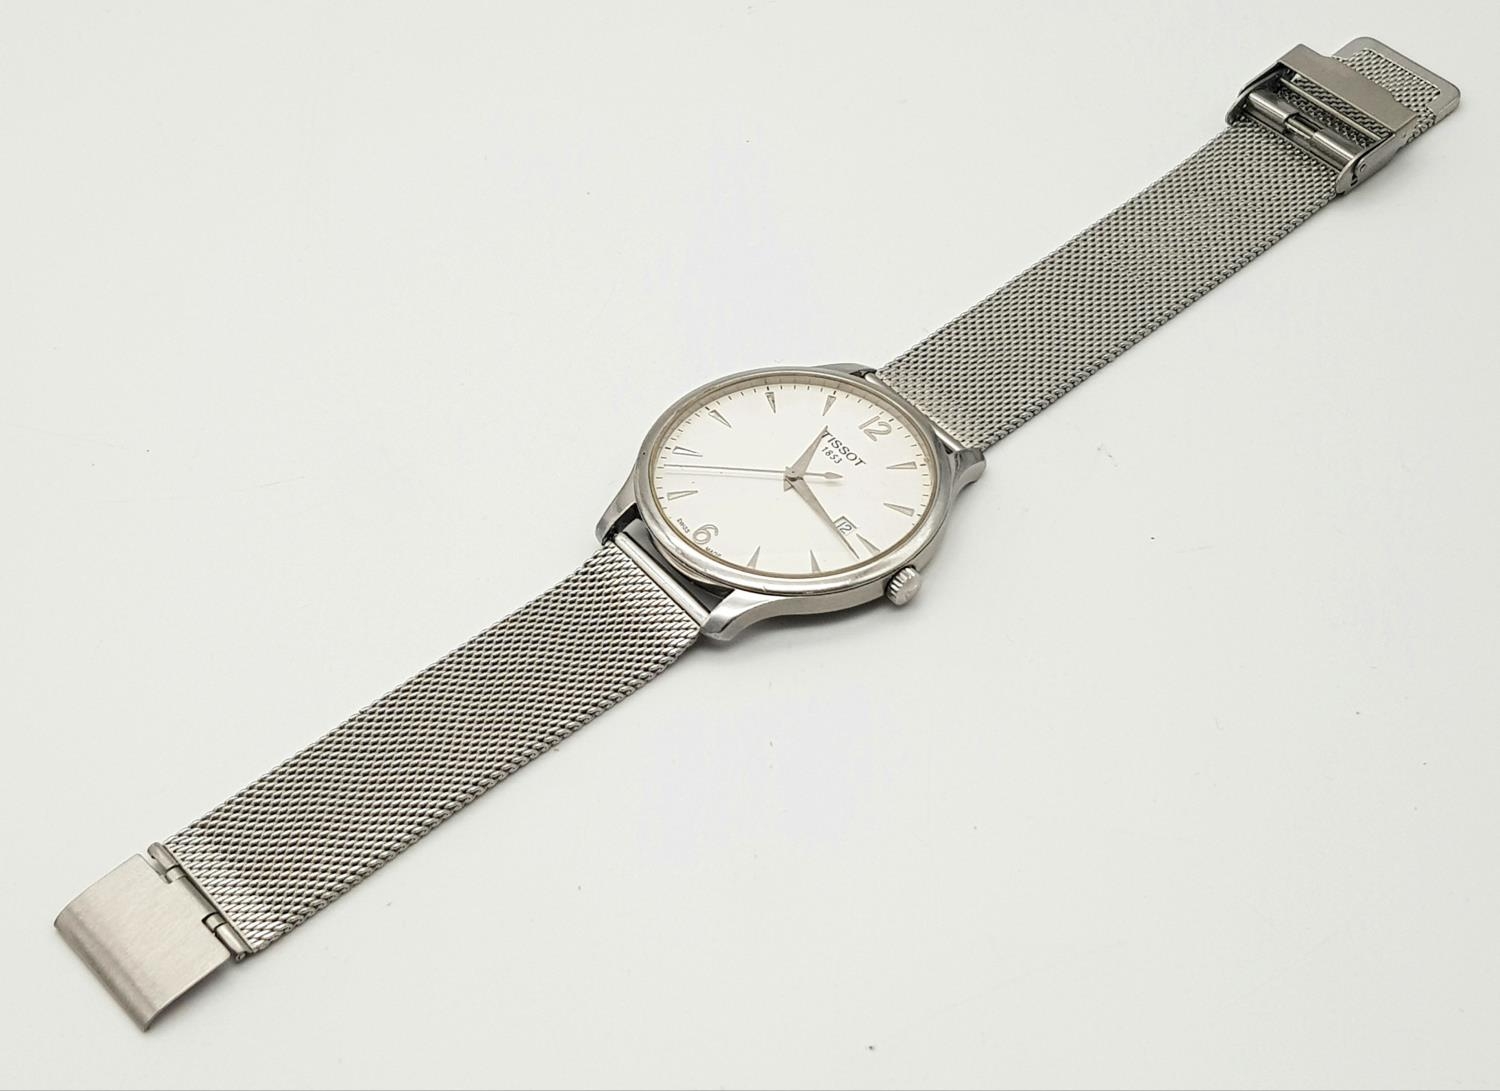 A Large Tissot Quartz Gents Watch. Stainless steel bracelet and case - 42mm. White dial with date - Image 4 of 6